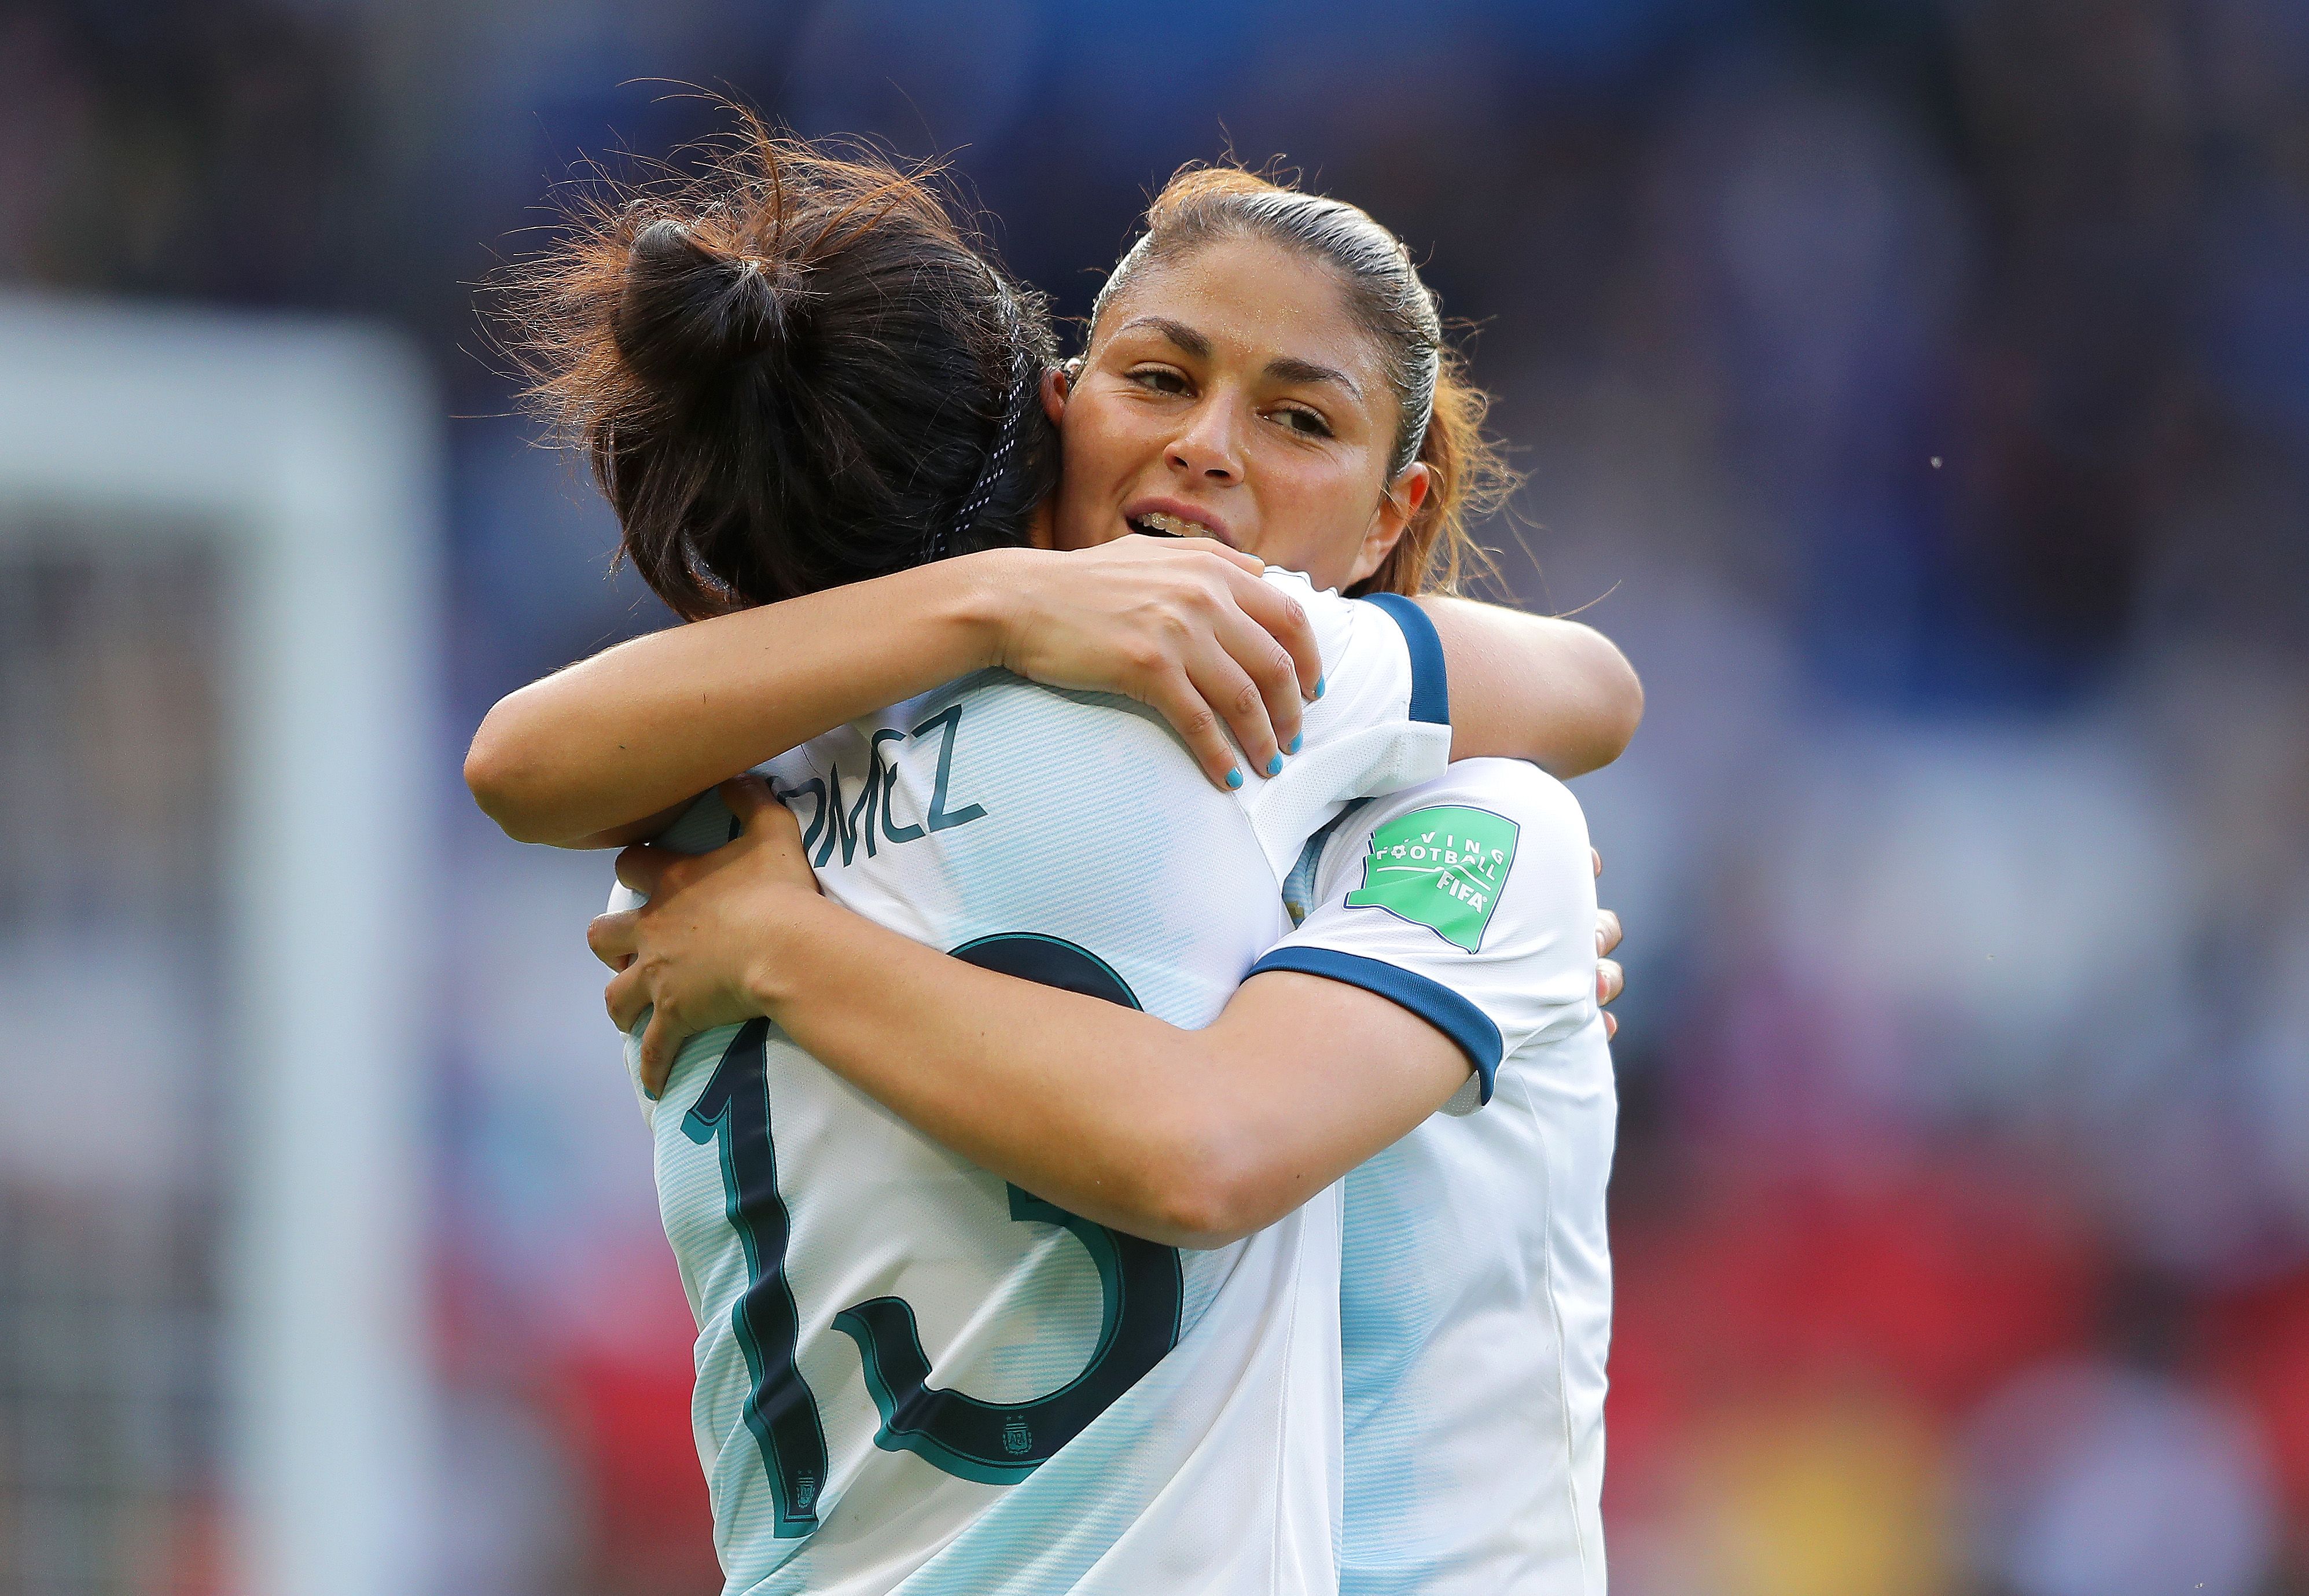 Argentina: Japan draw secures first point in Women's World Cup history